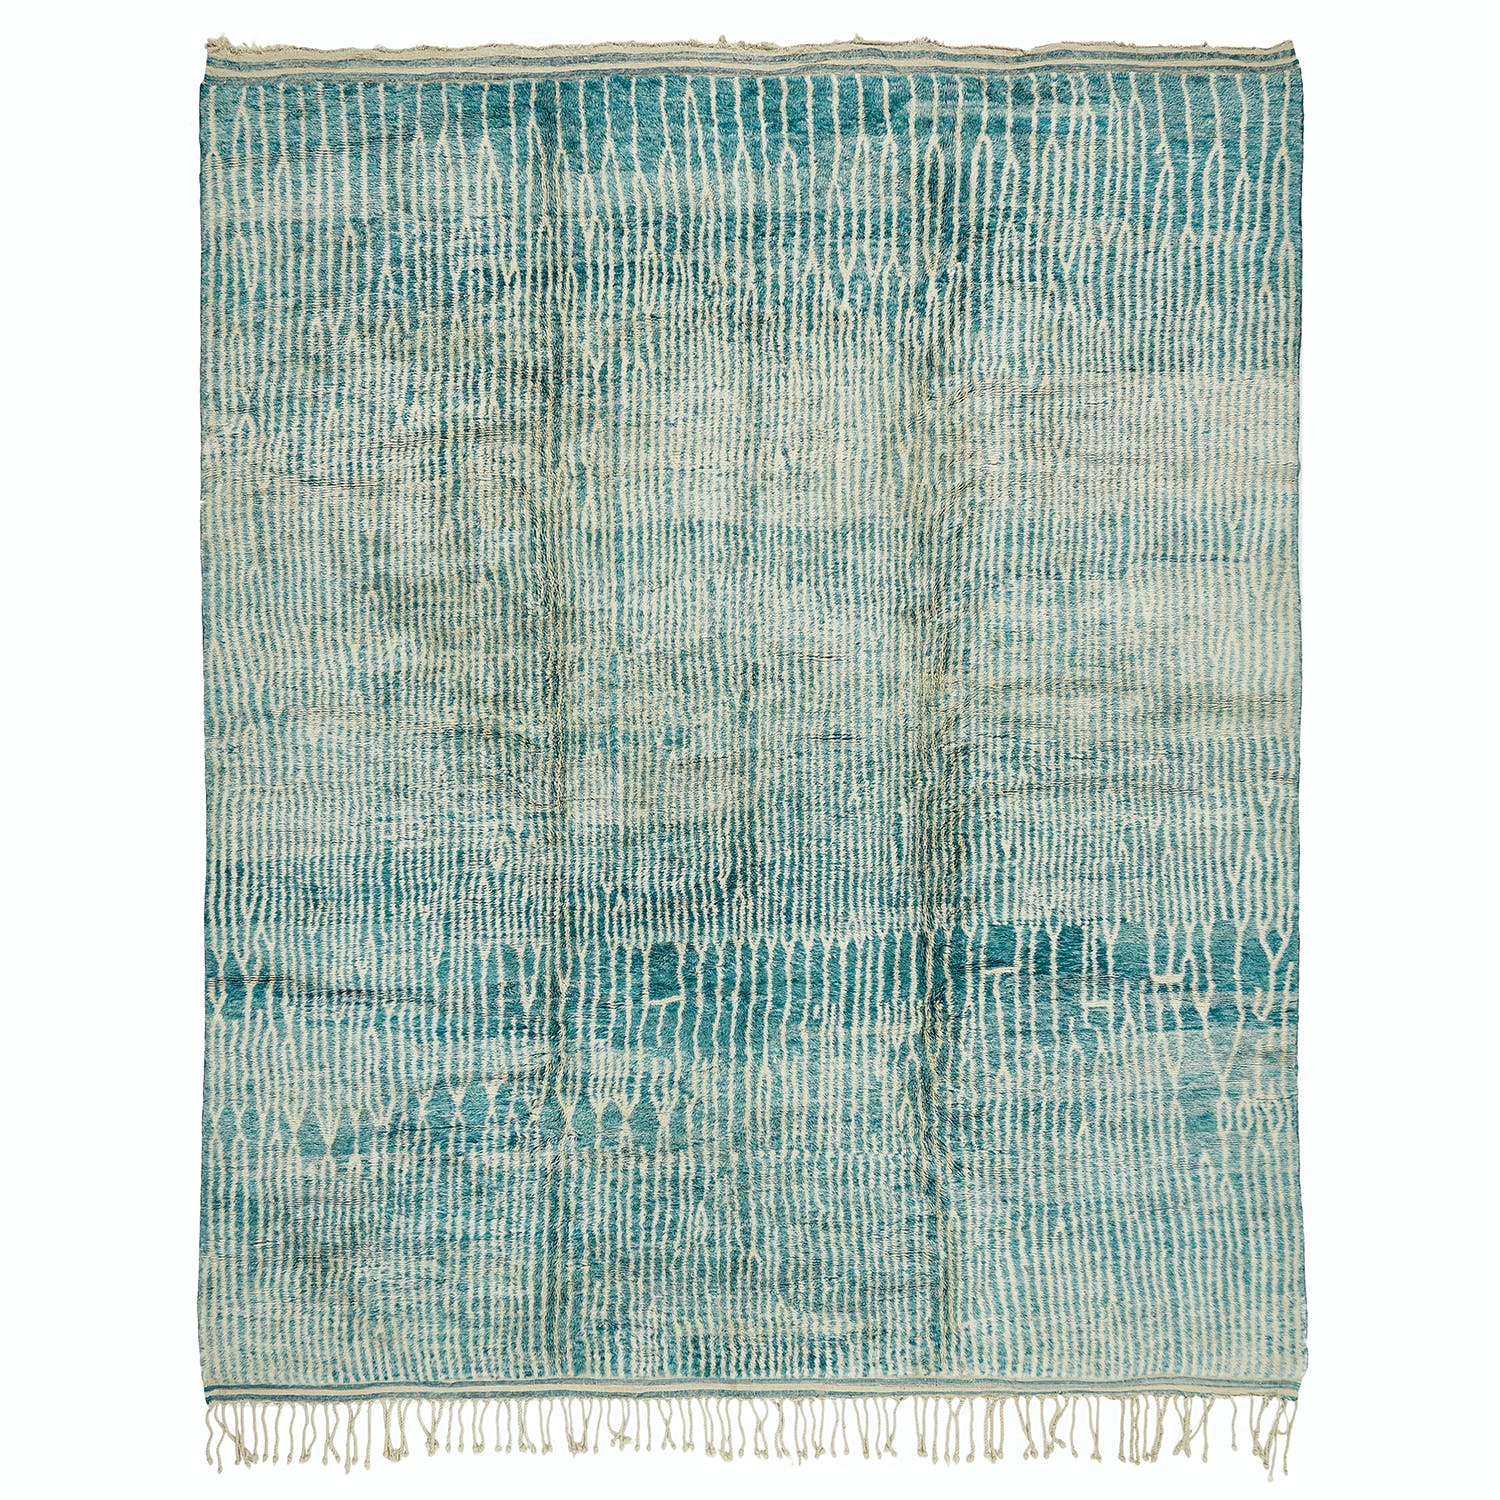 Blue woven textile with organic pattern and fringe details.